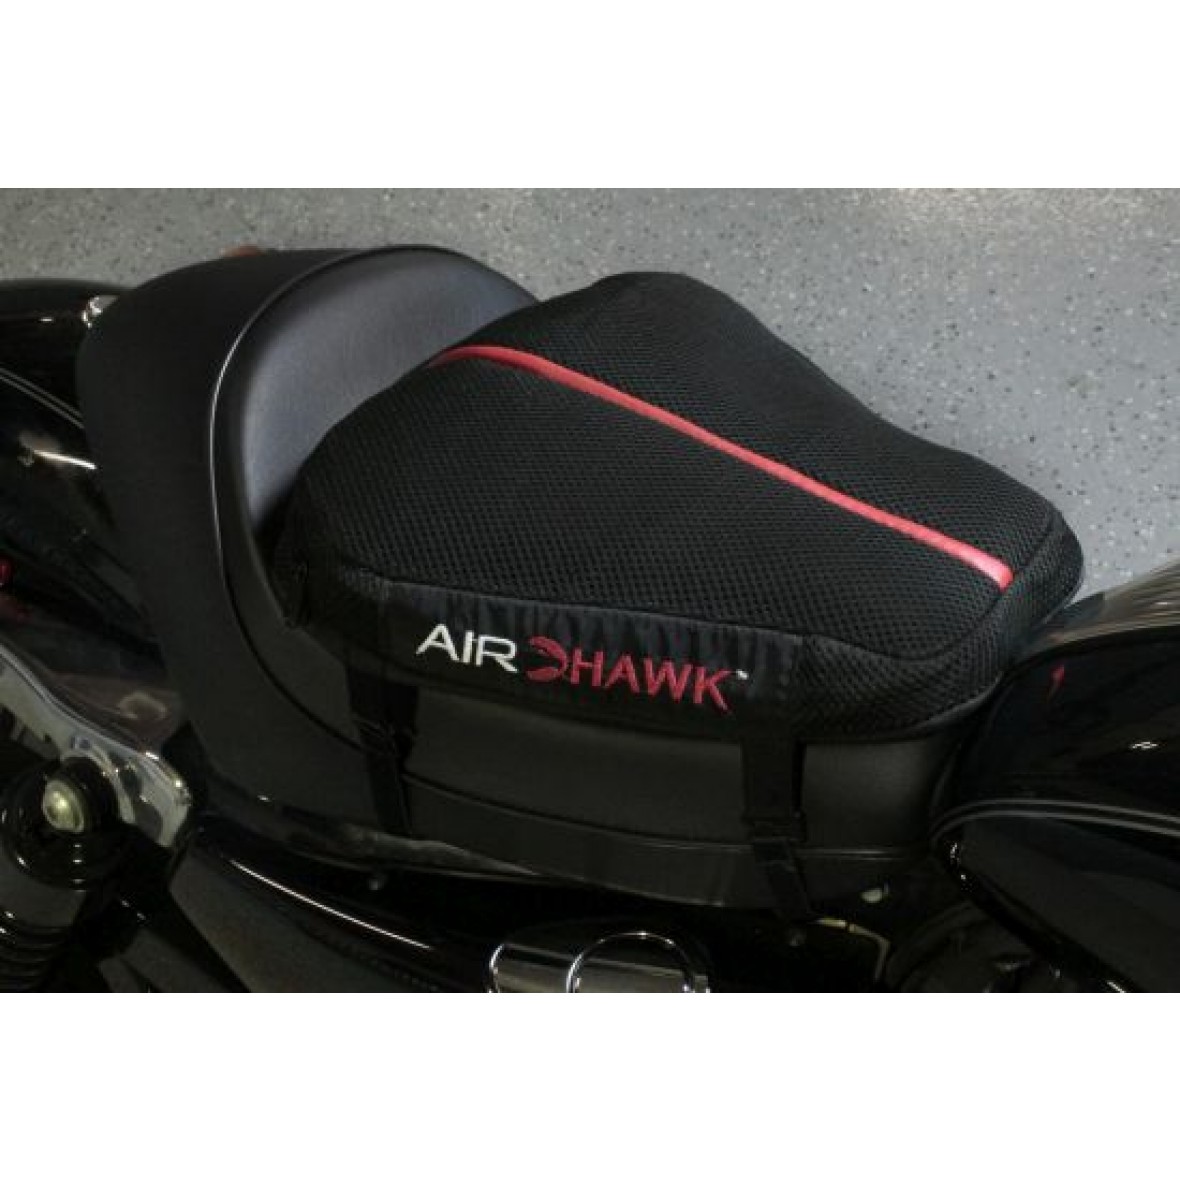 Replaces AIRHAWK DualSport Air Pad Motorcycle Seat Cushion 30cm * 30cm FA  DUALSPORT Includes Everything Shown in the Picutre| | - AliExpress